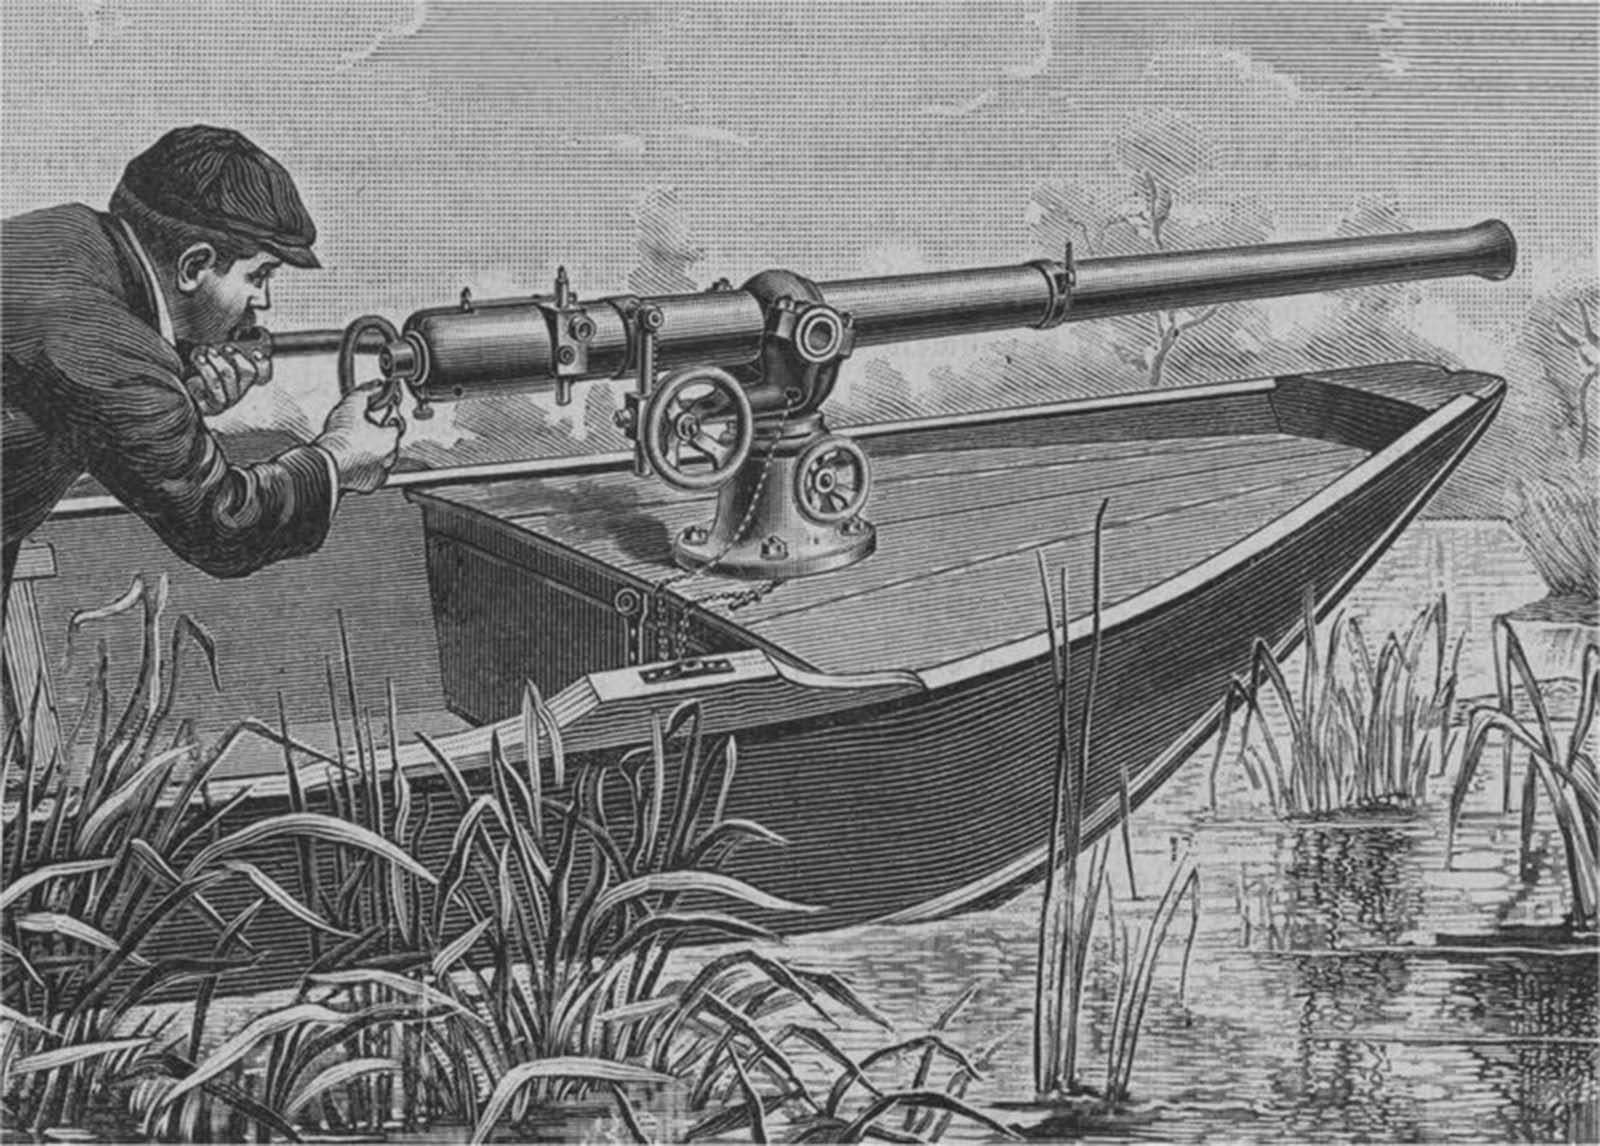 A Punt Gun, used for duck hunting but were banned because 